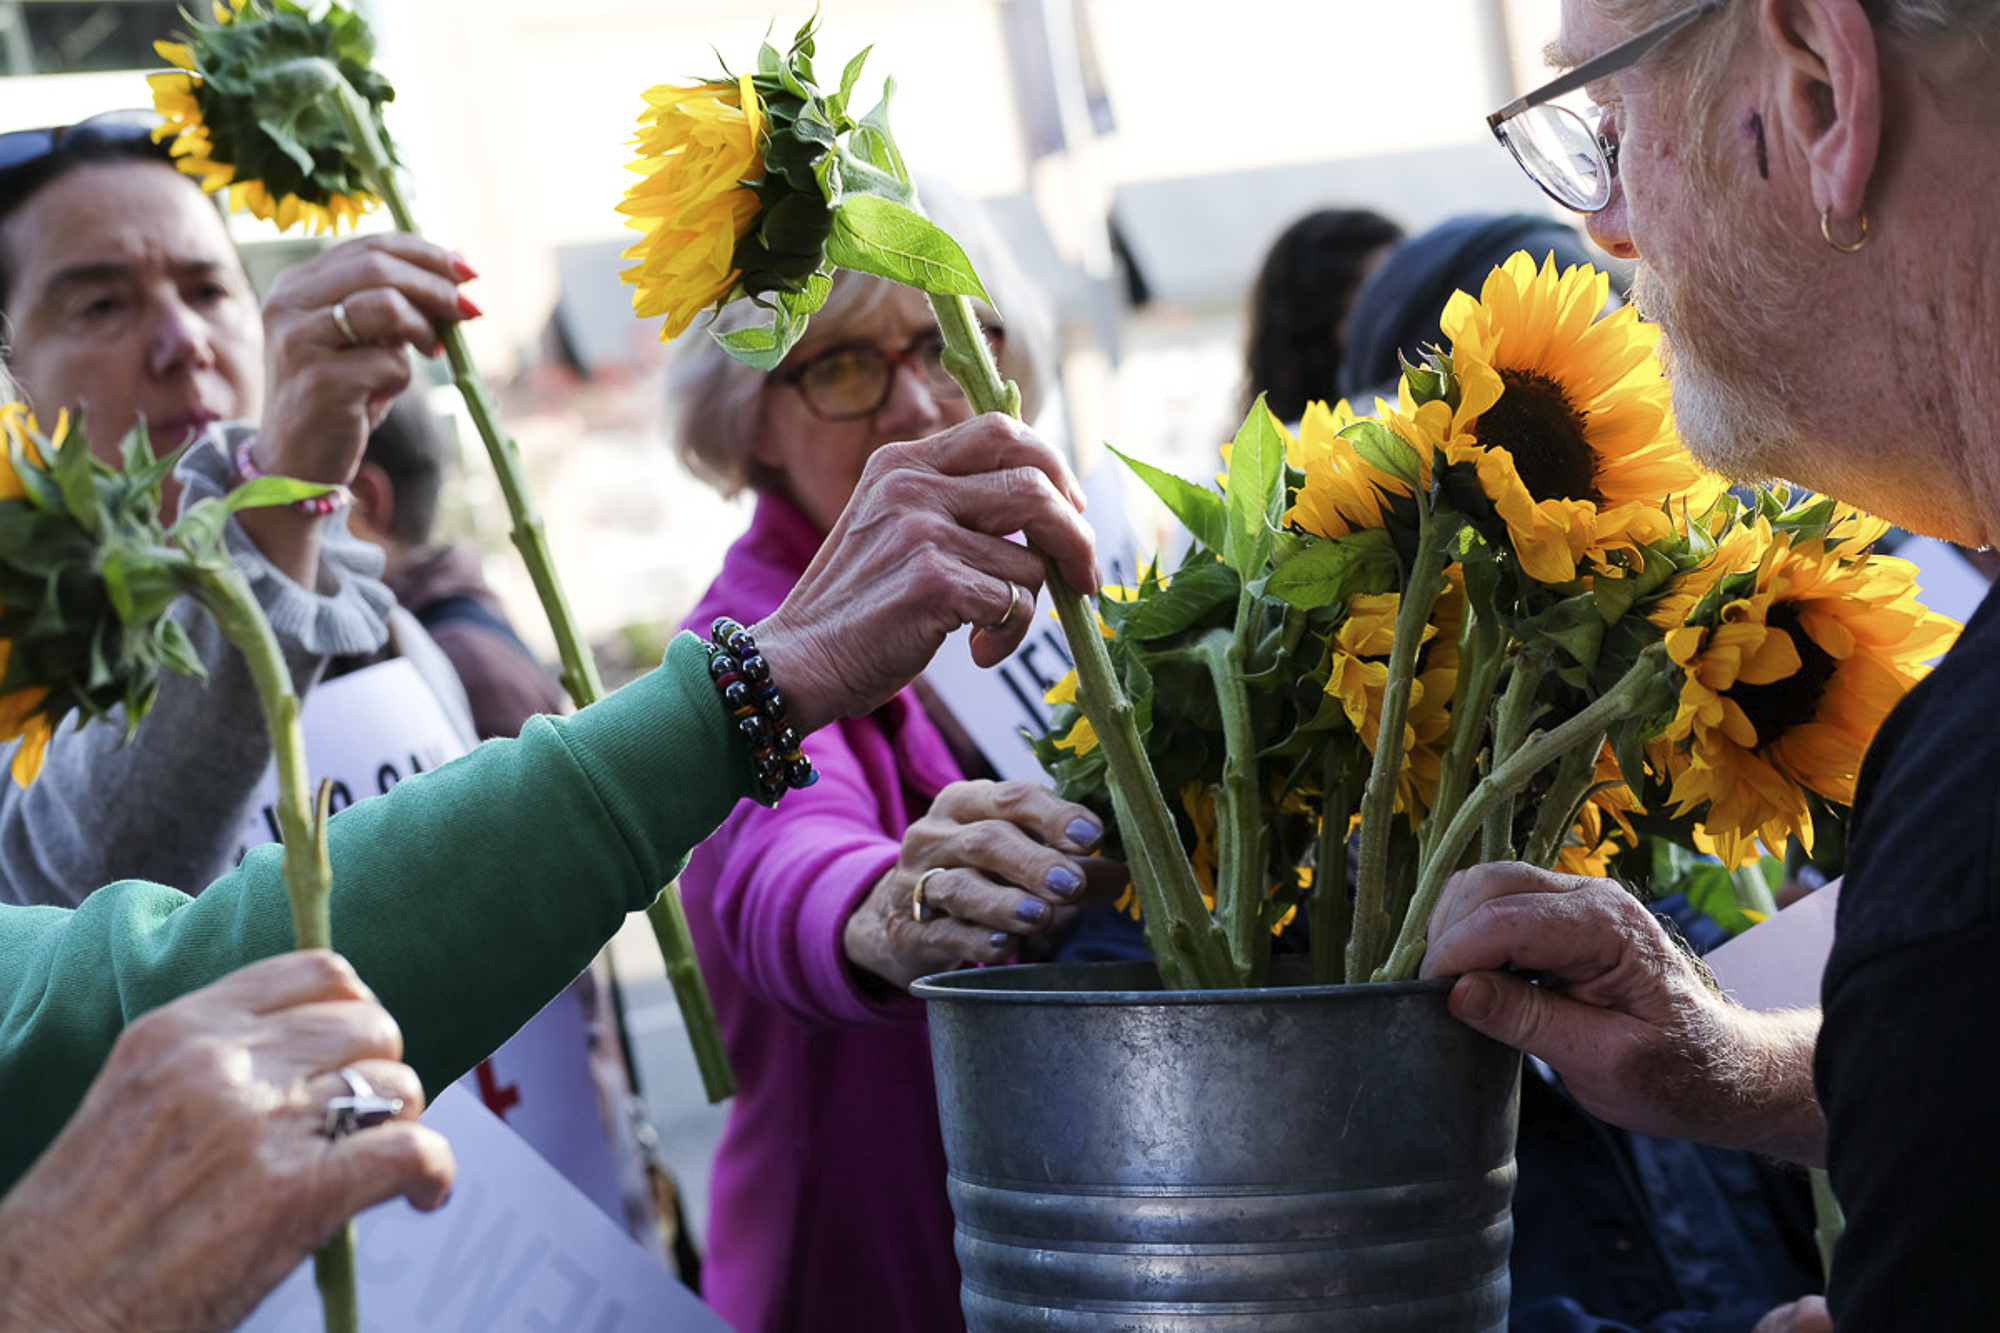  Sunflowers were passed out to represent Palestian's who died during The Great March of Return in Santa Monica, California on May 18, 2018. The sunflowers signify hope and resilience.  (Jayrol San Jose/Corsair Contributor) 